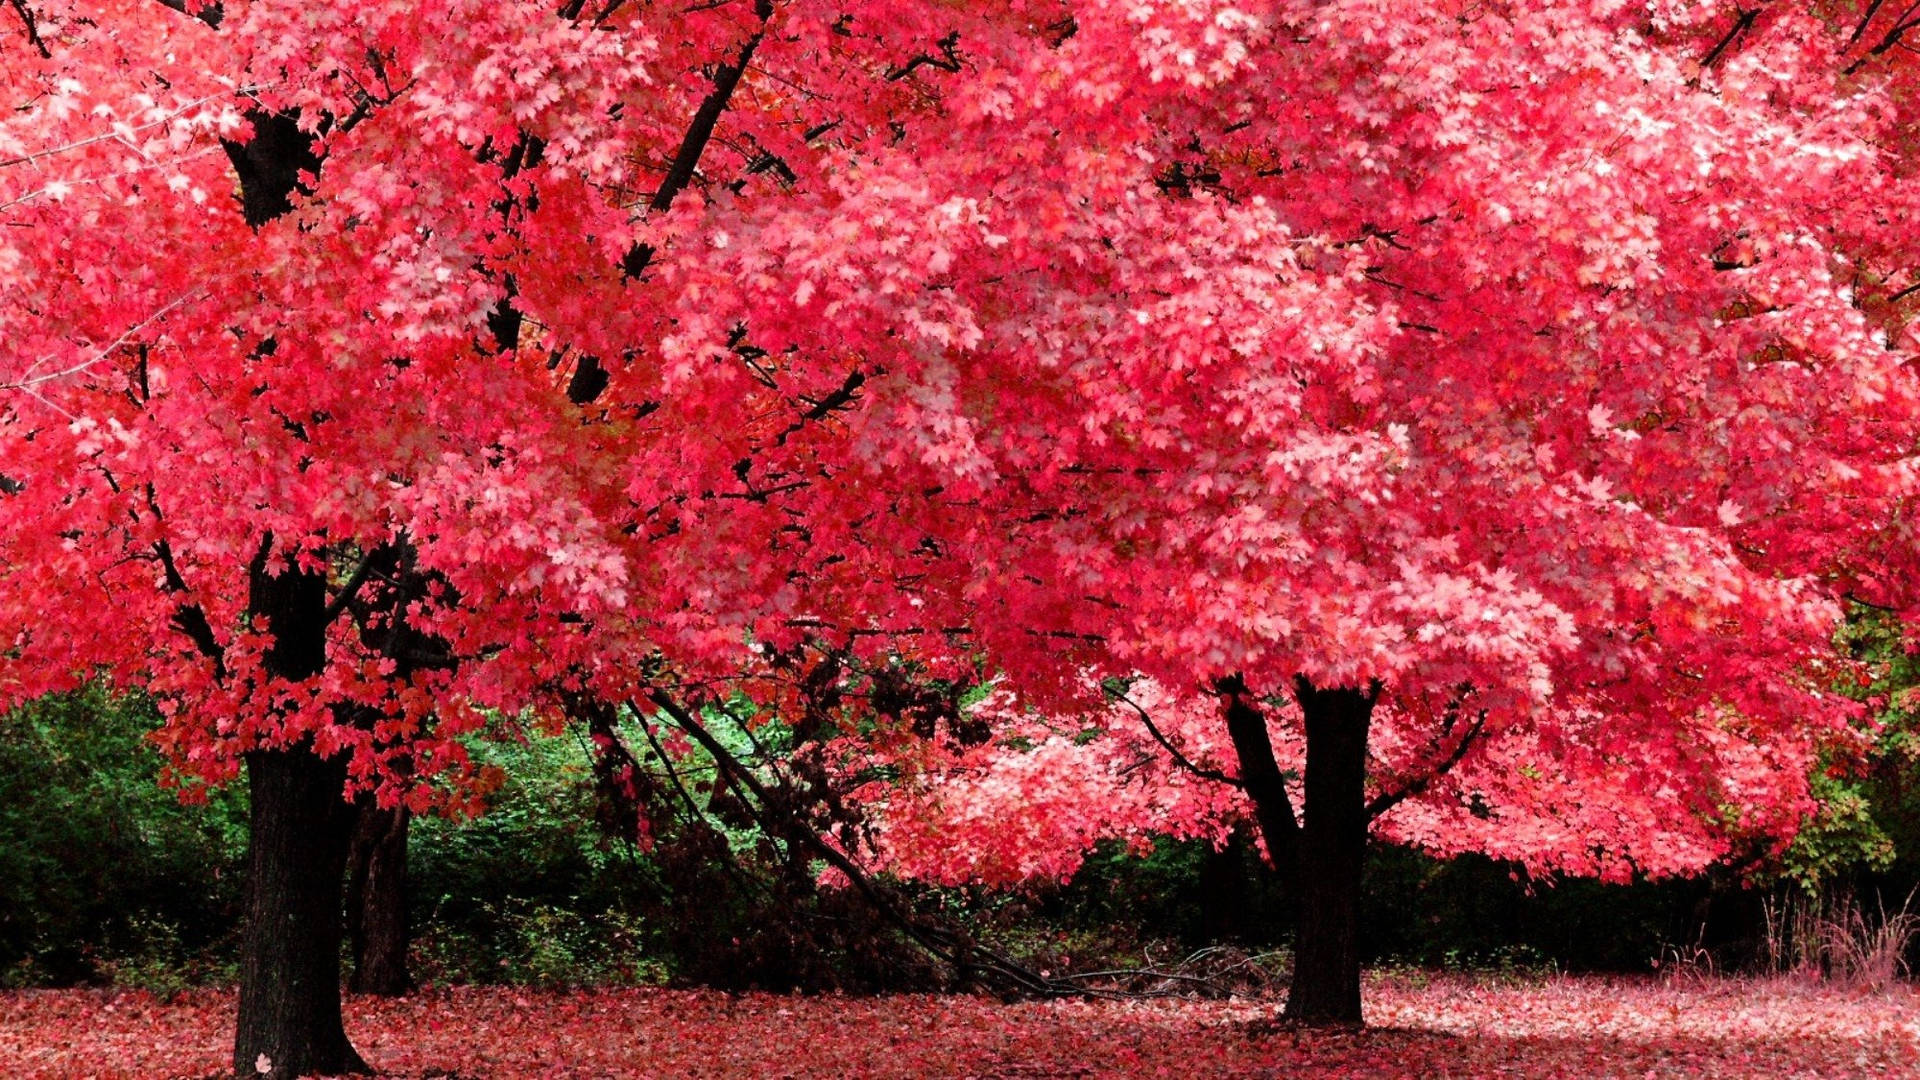 Aesthetic Fall Red Maple Trees Wallpaper